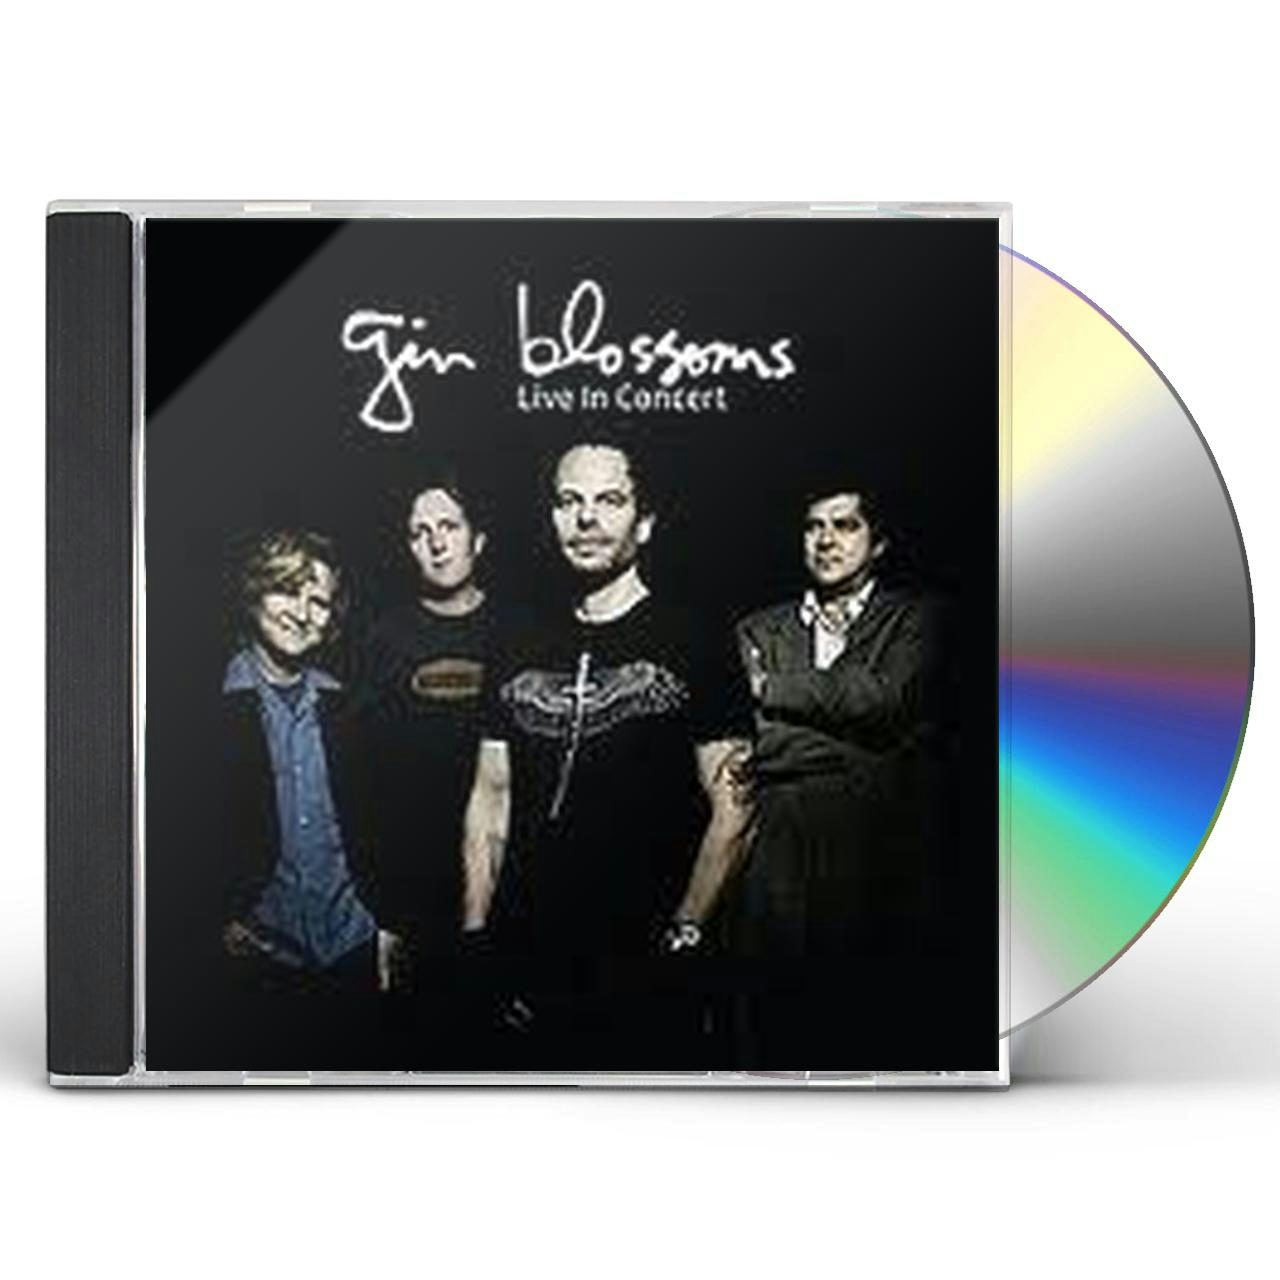 Gin Blossoms LIVE IN CONCERT CD